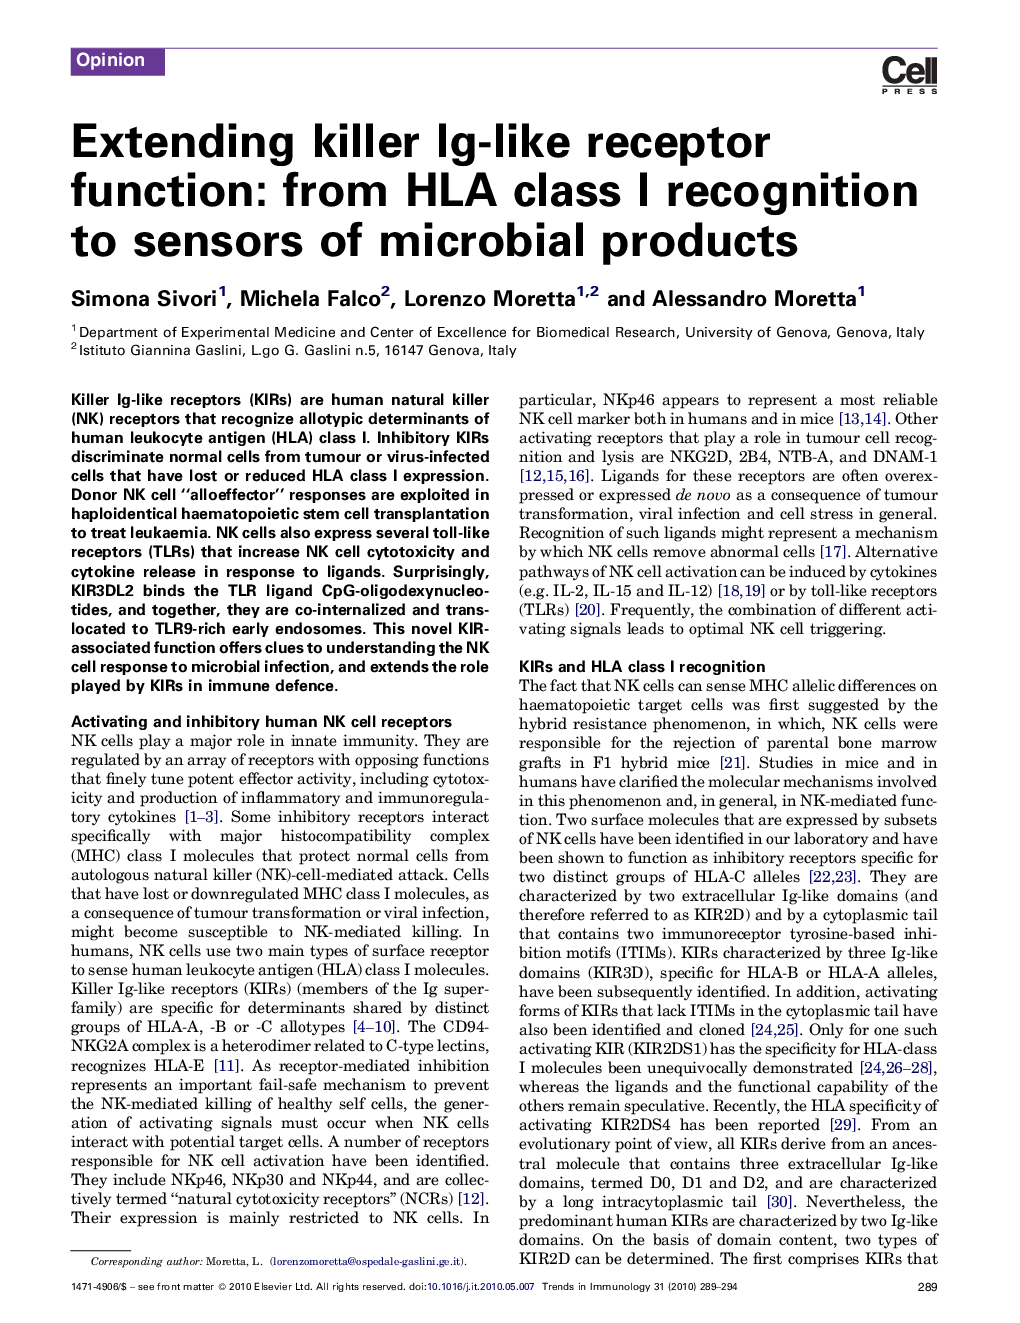 Extending killer Ig-like receptor function: from HLA class I recognition to sensors of microbial products